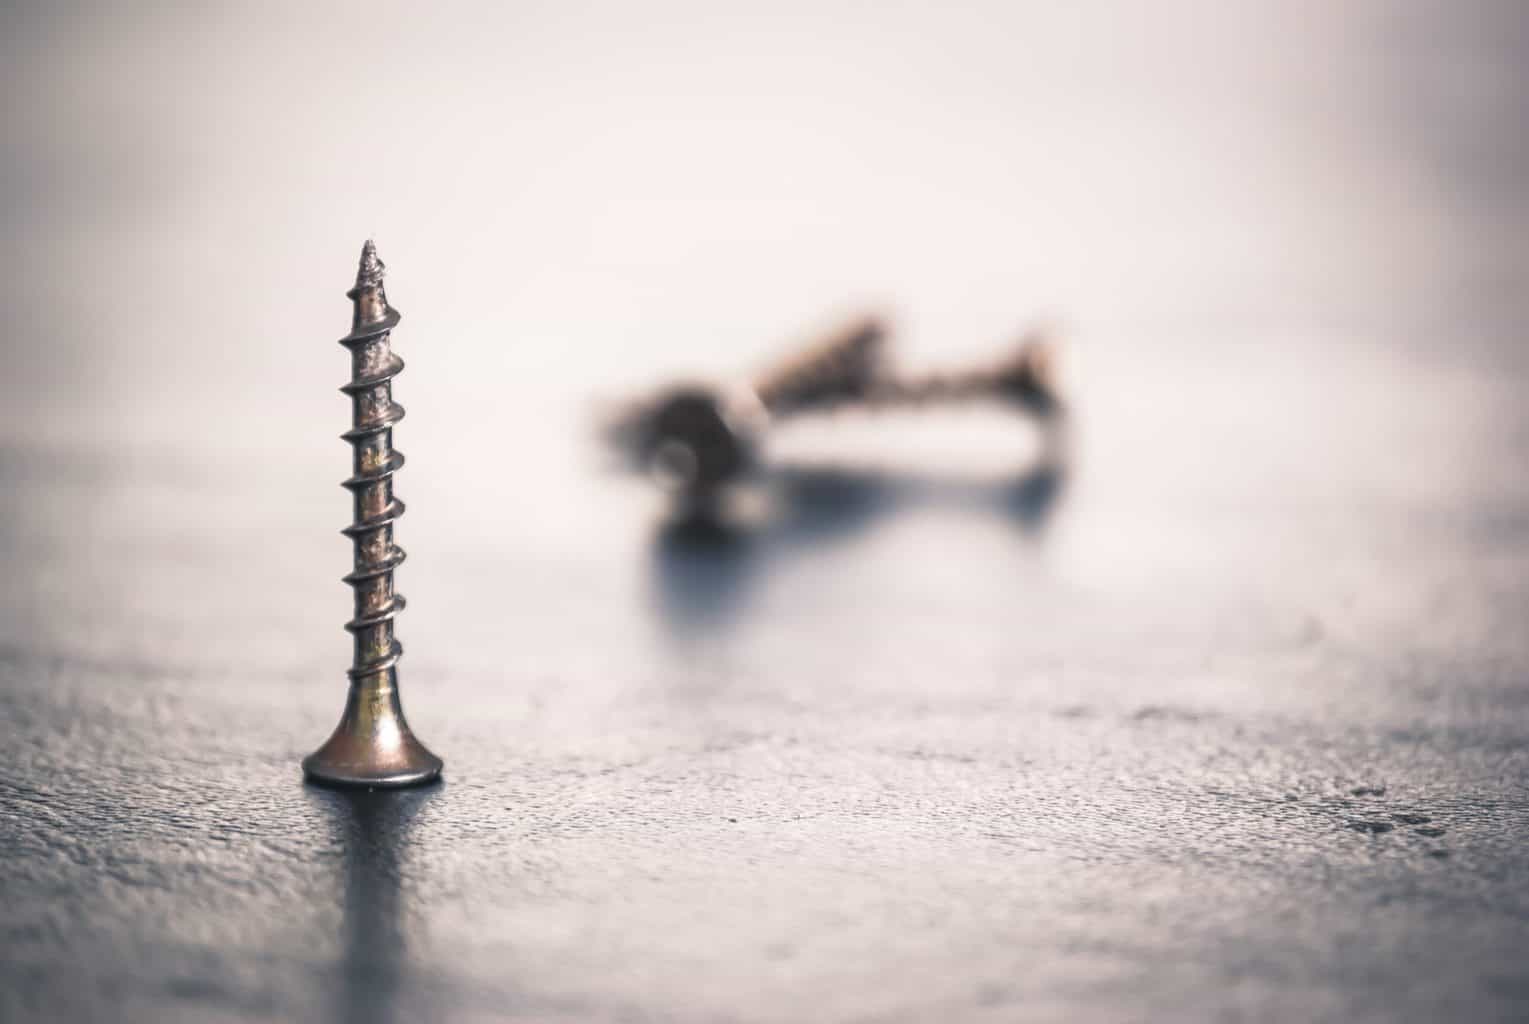 A screw standing on display